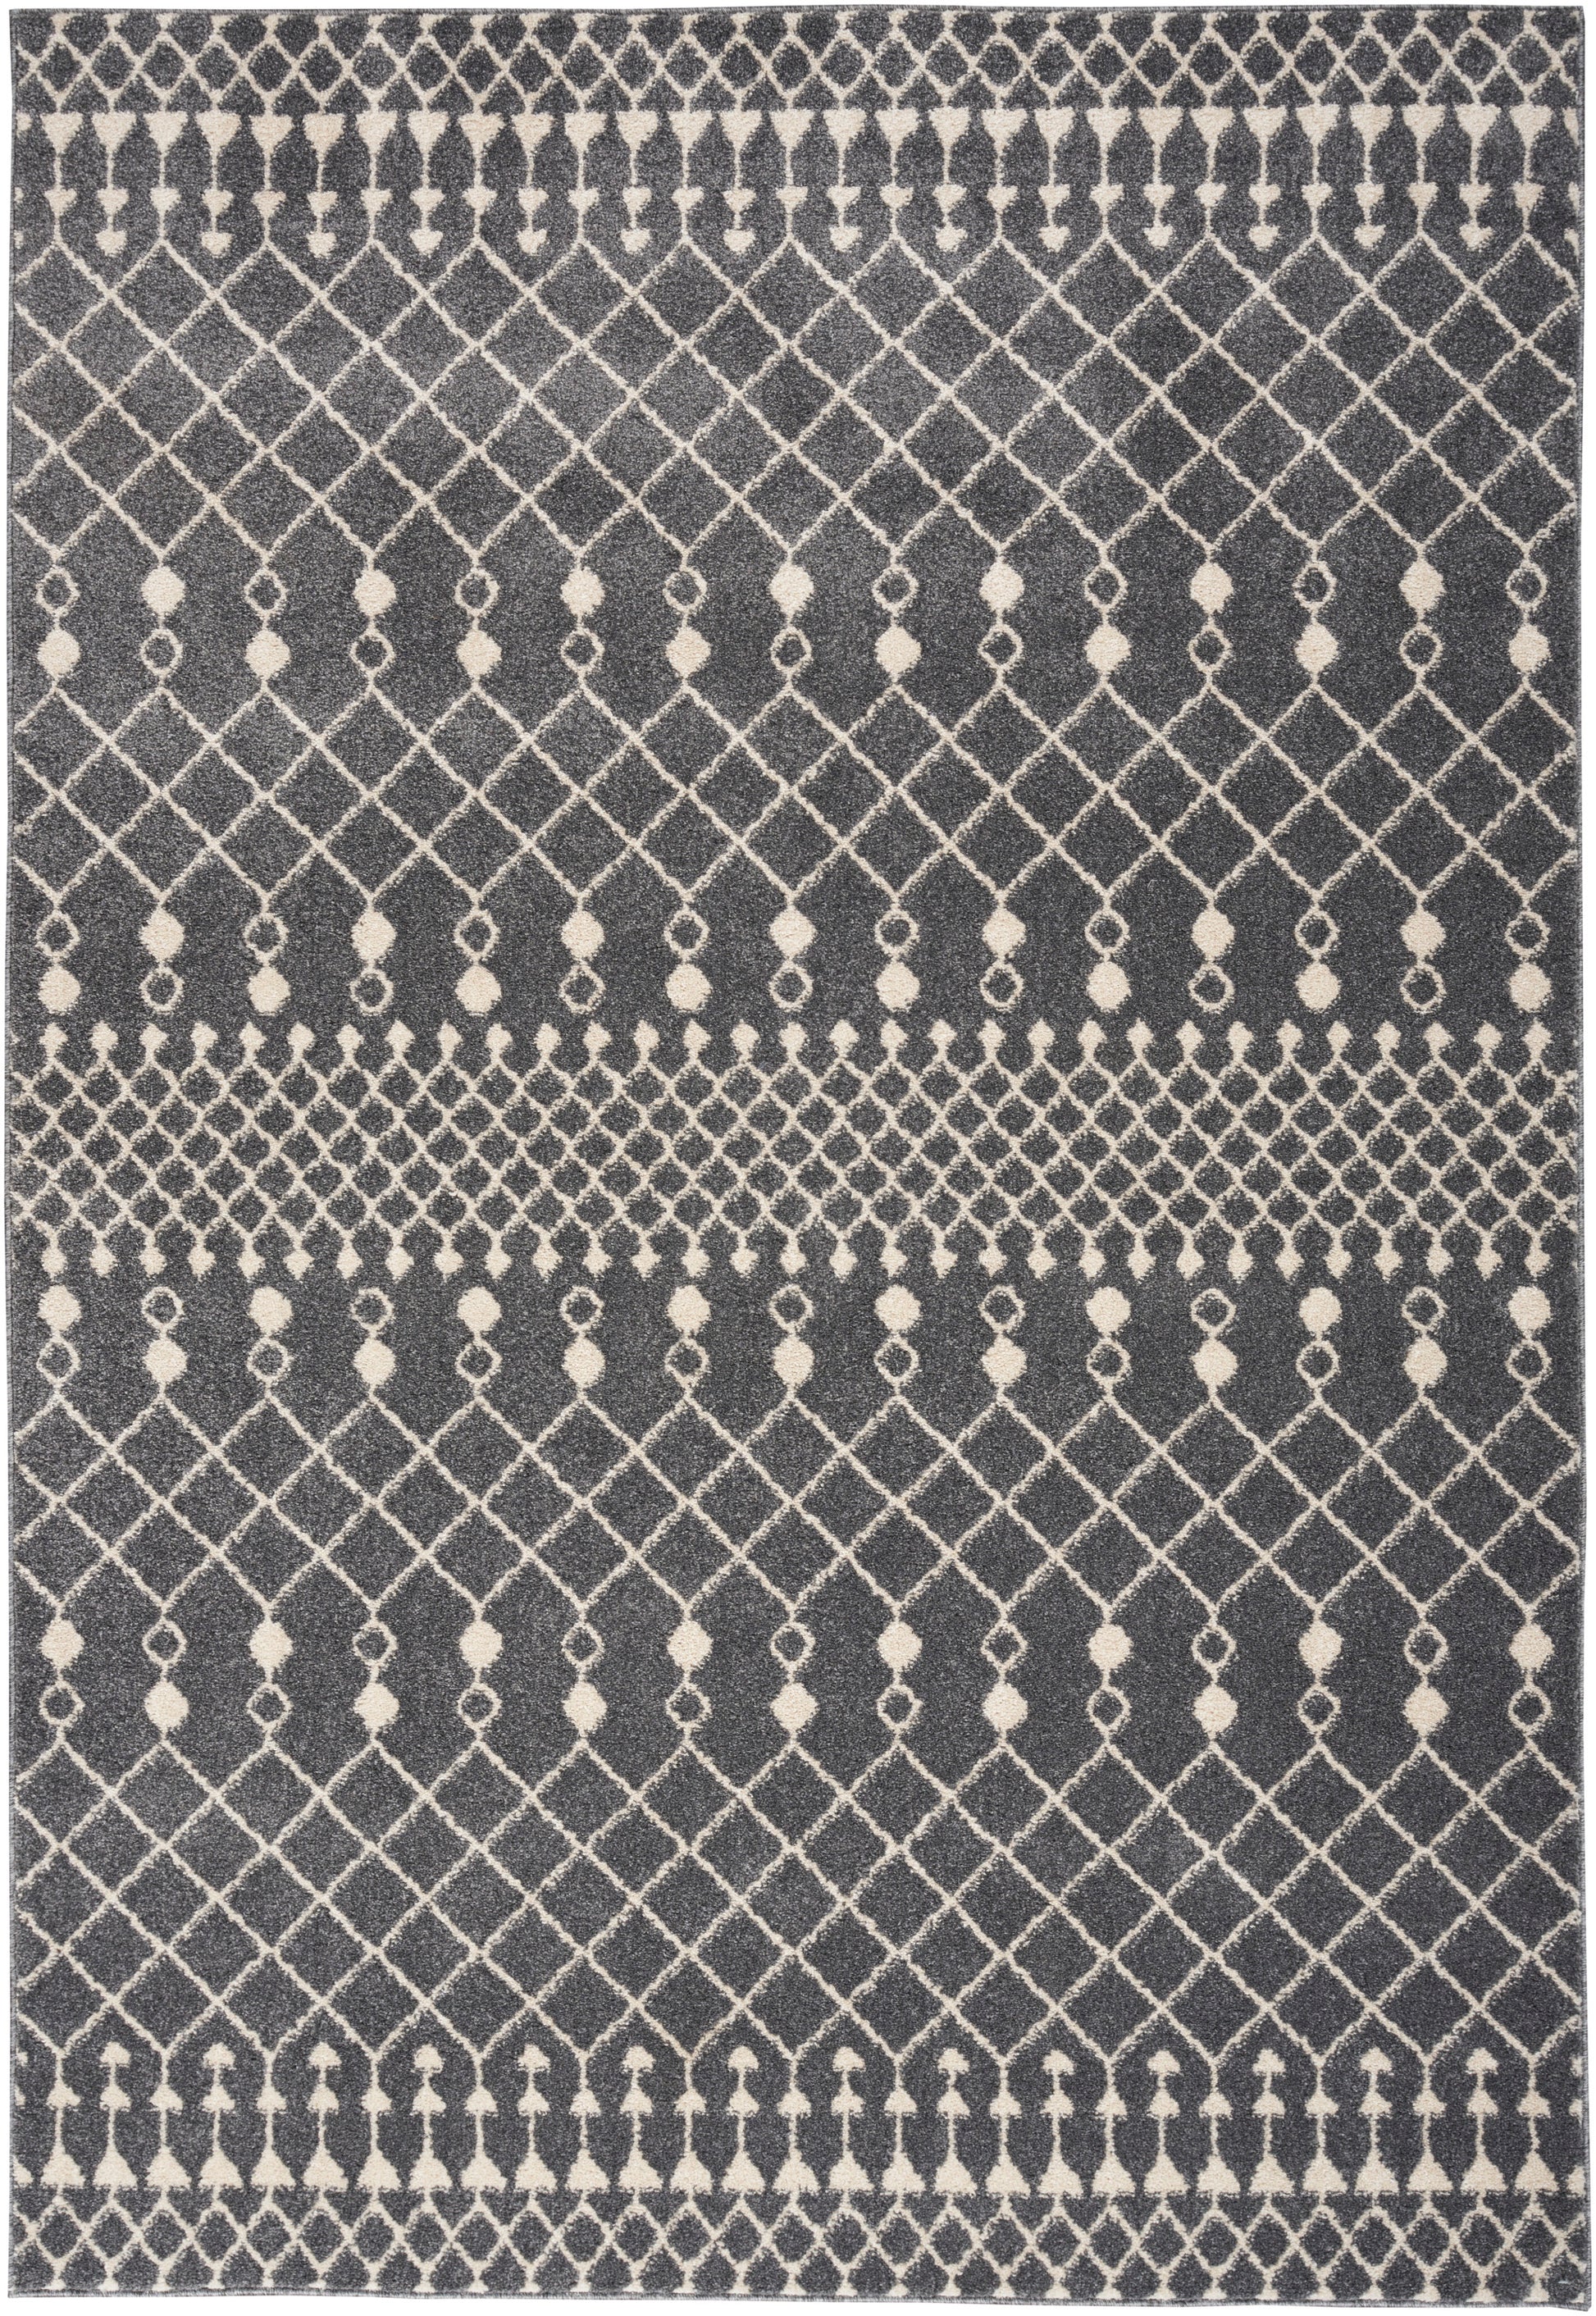 Nourison Palermo Pmr03 Charcoal/Ivory Area Rug